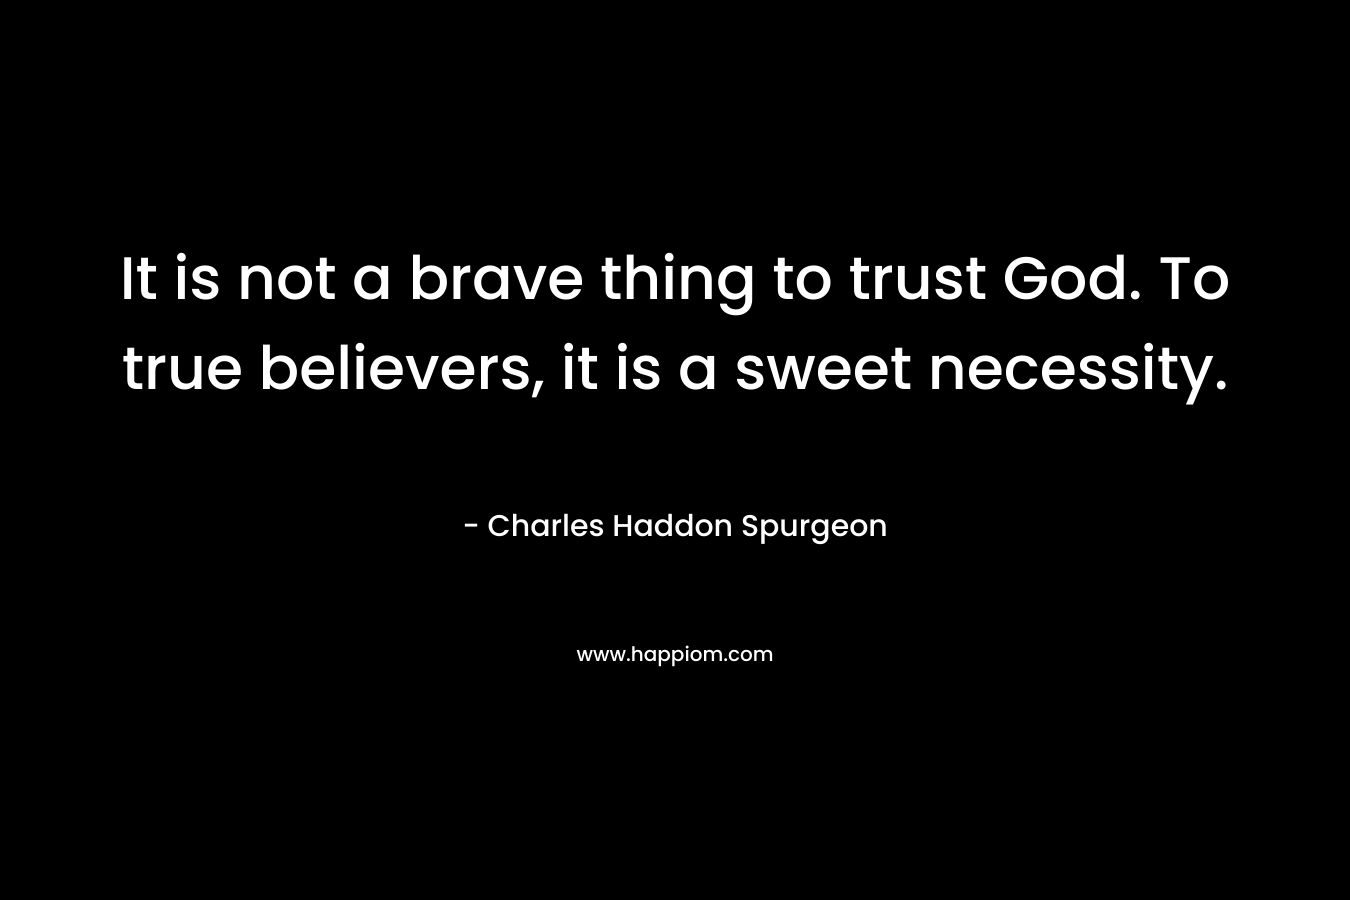 It is not a brave thing to trust God. To true believers, it is a sweet necessity.